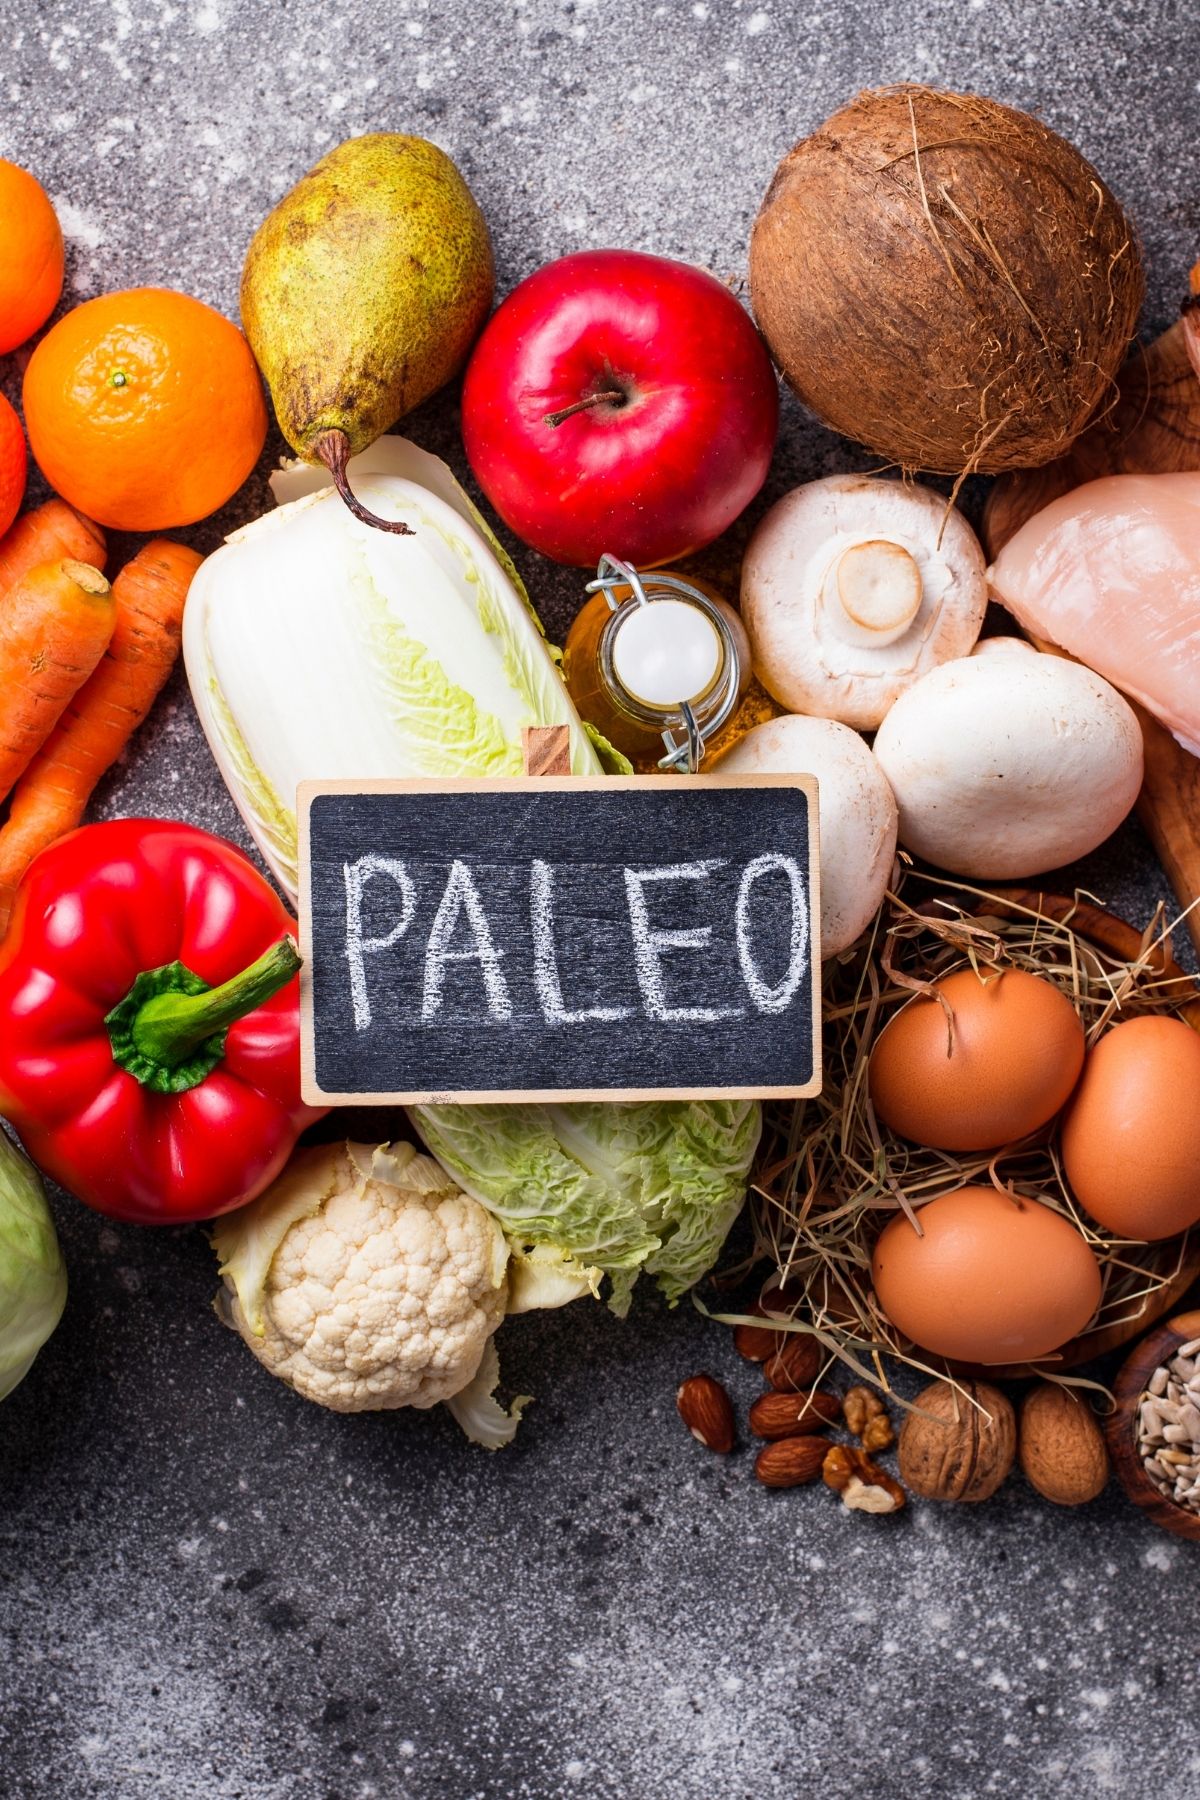 healthy foods on a countertop with a sign that says paleo.